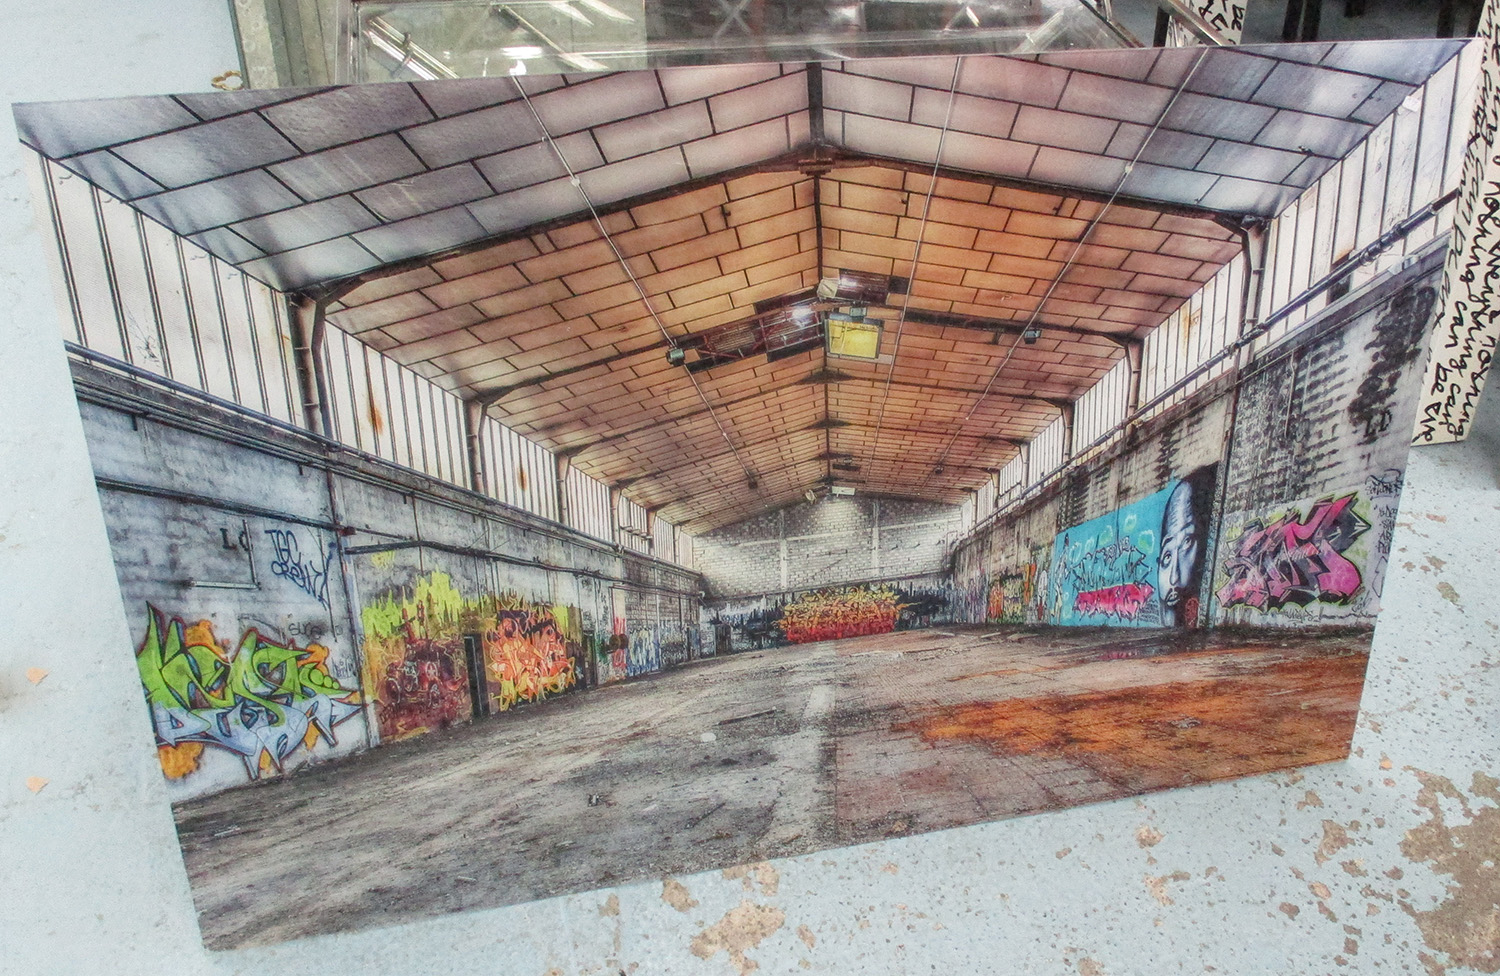 PHOTOPRINT, 21st Century, of a deserted warehouse with graffiti on acrylic, 120cm x 80cm.